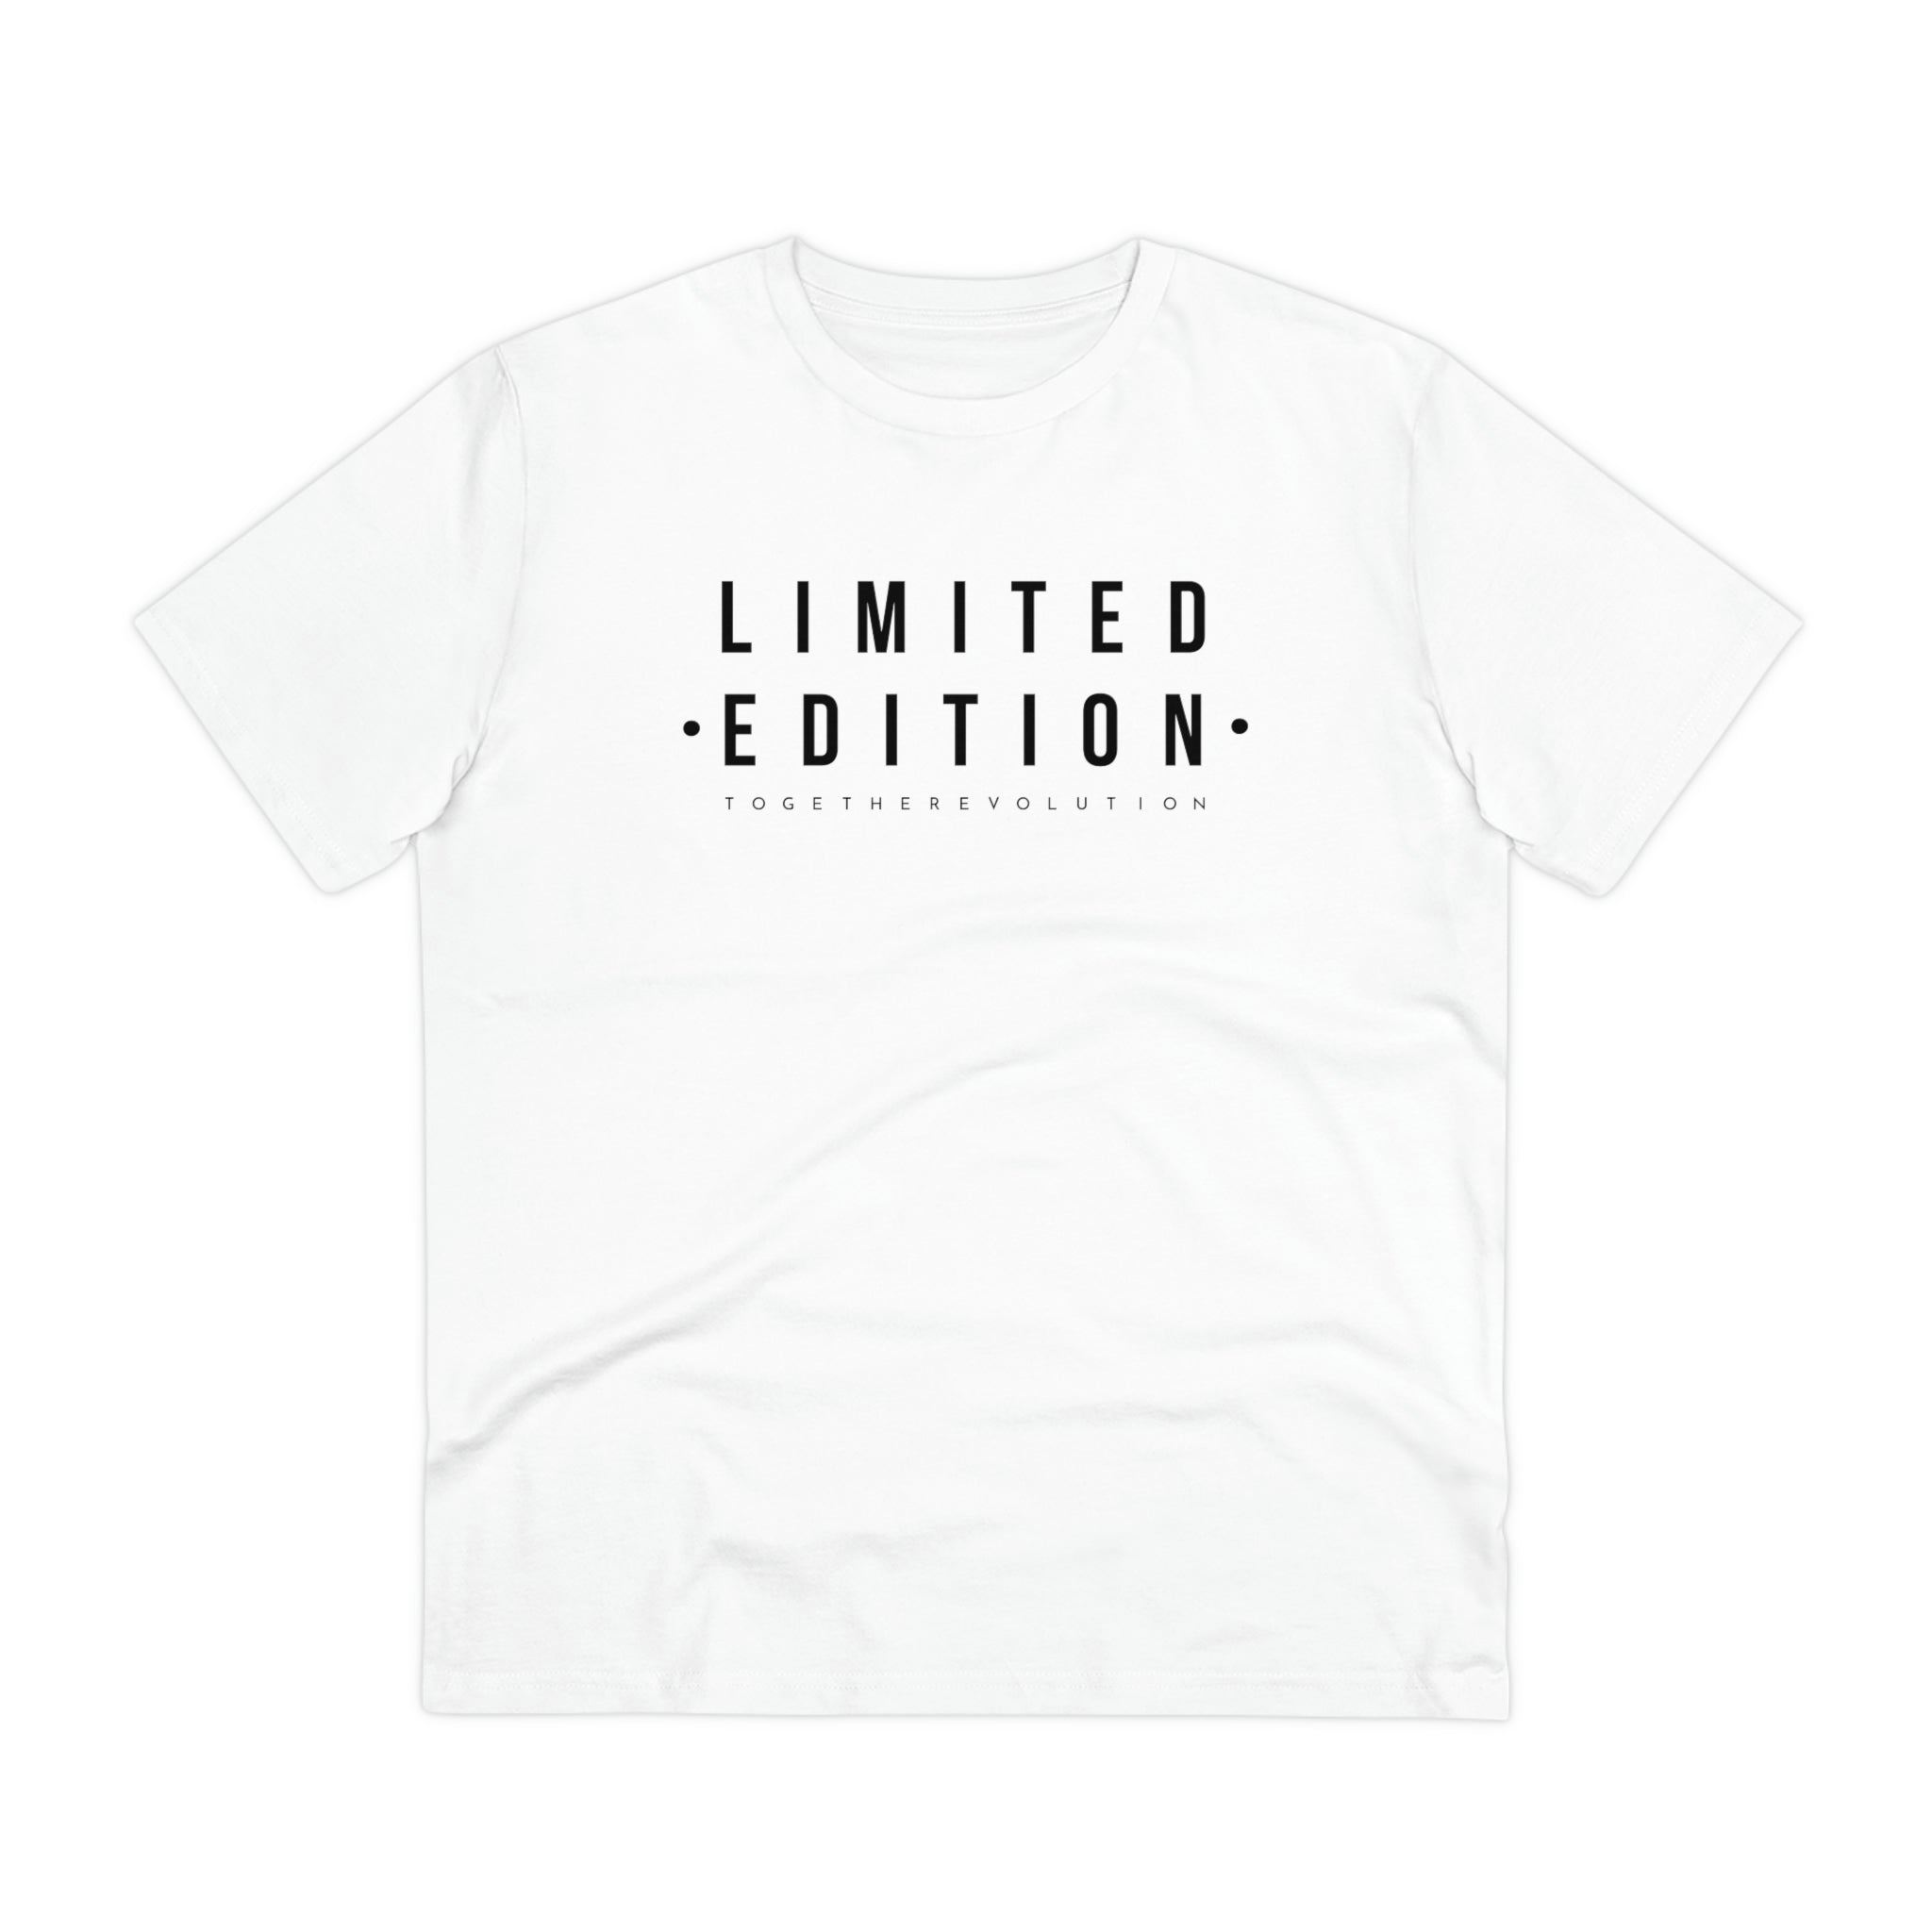 Limited Edition The Together Revolution